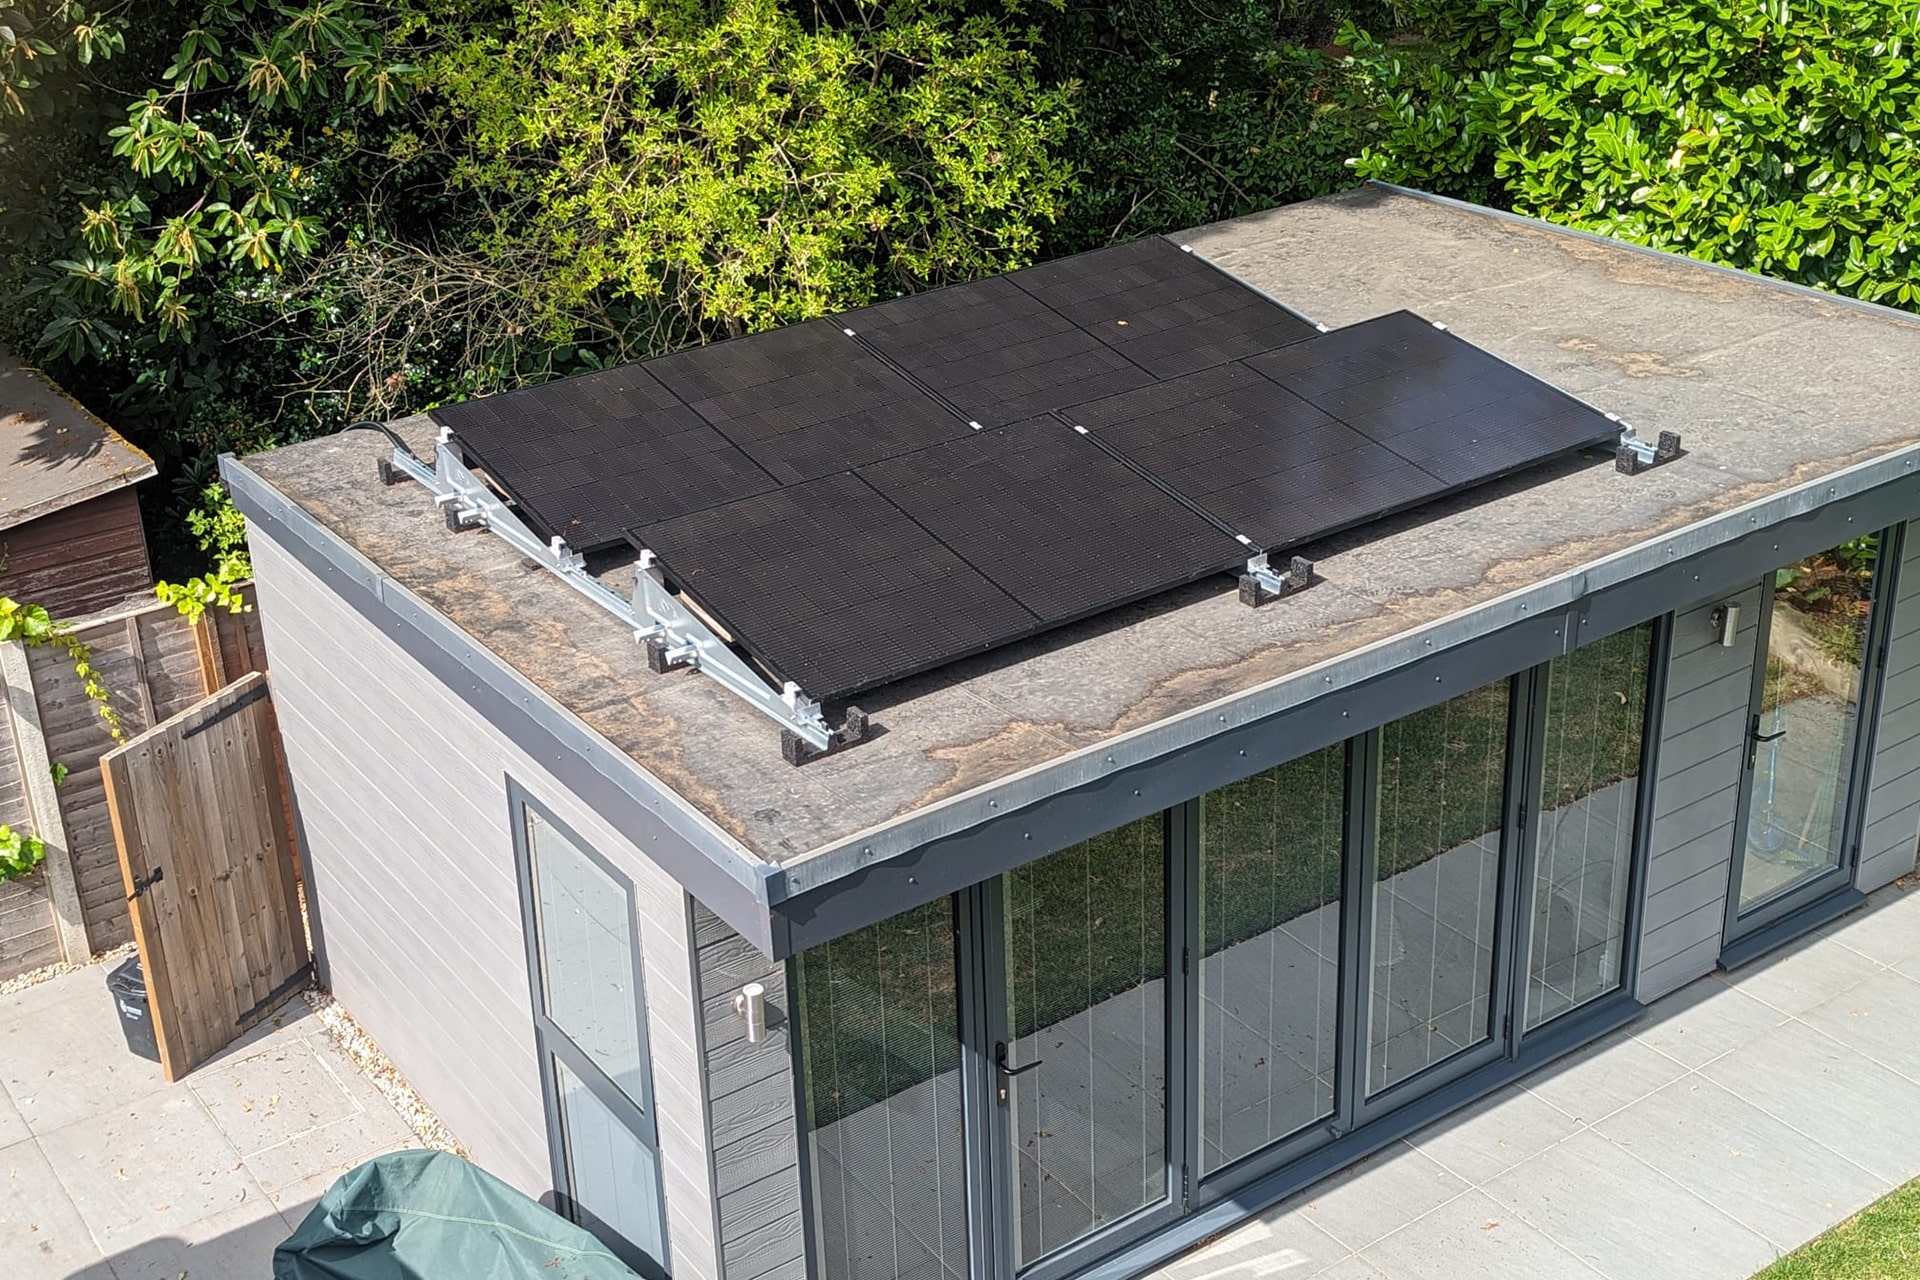 Solar PV on small building outside